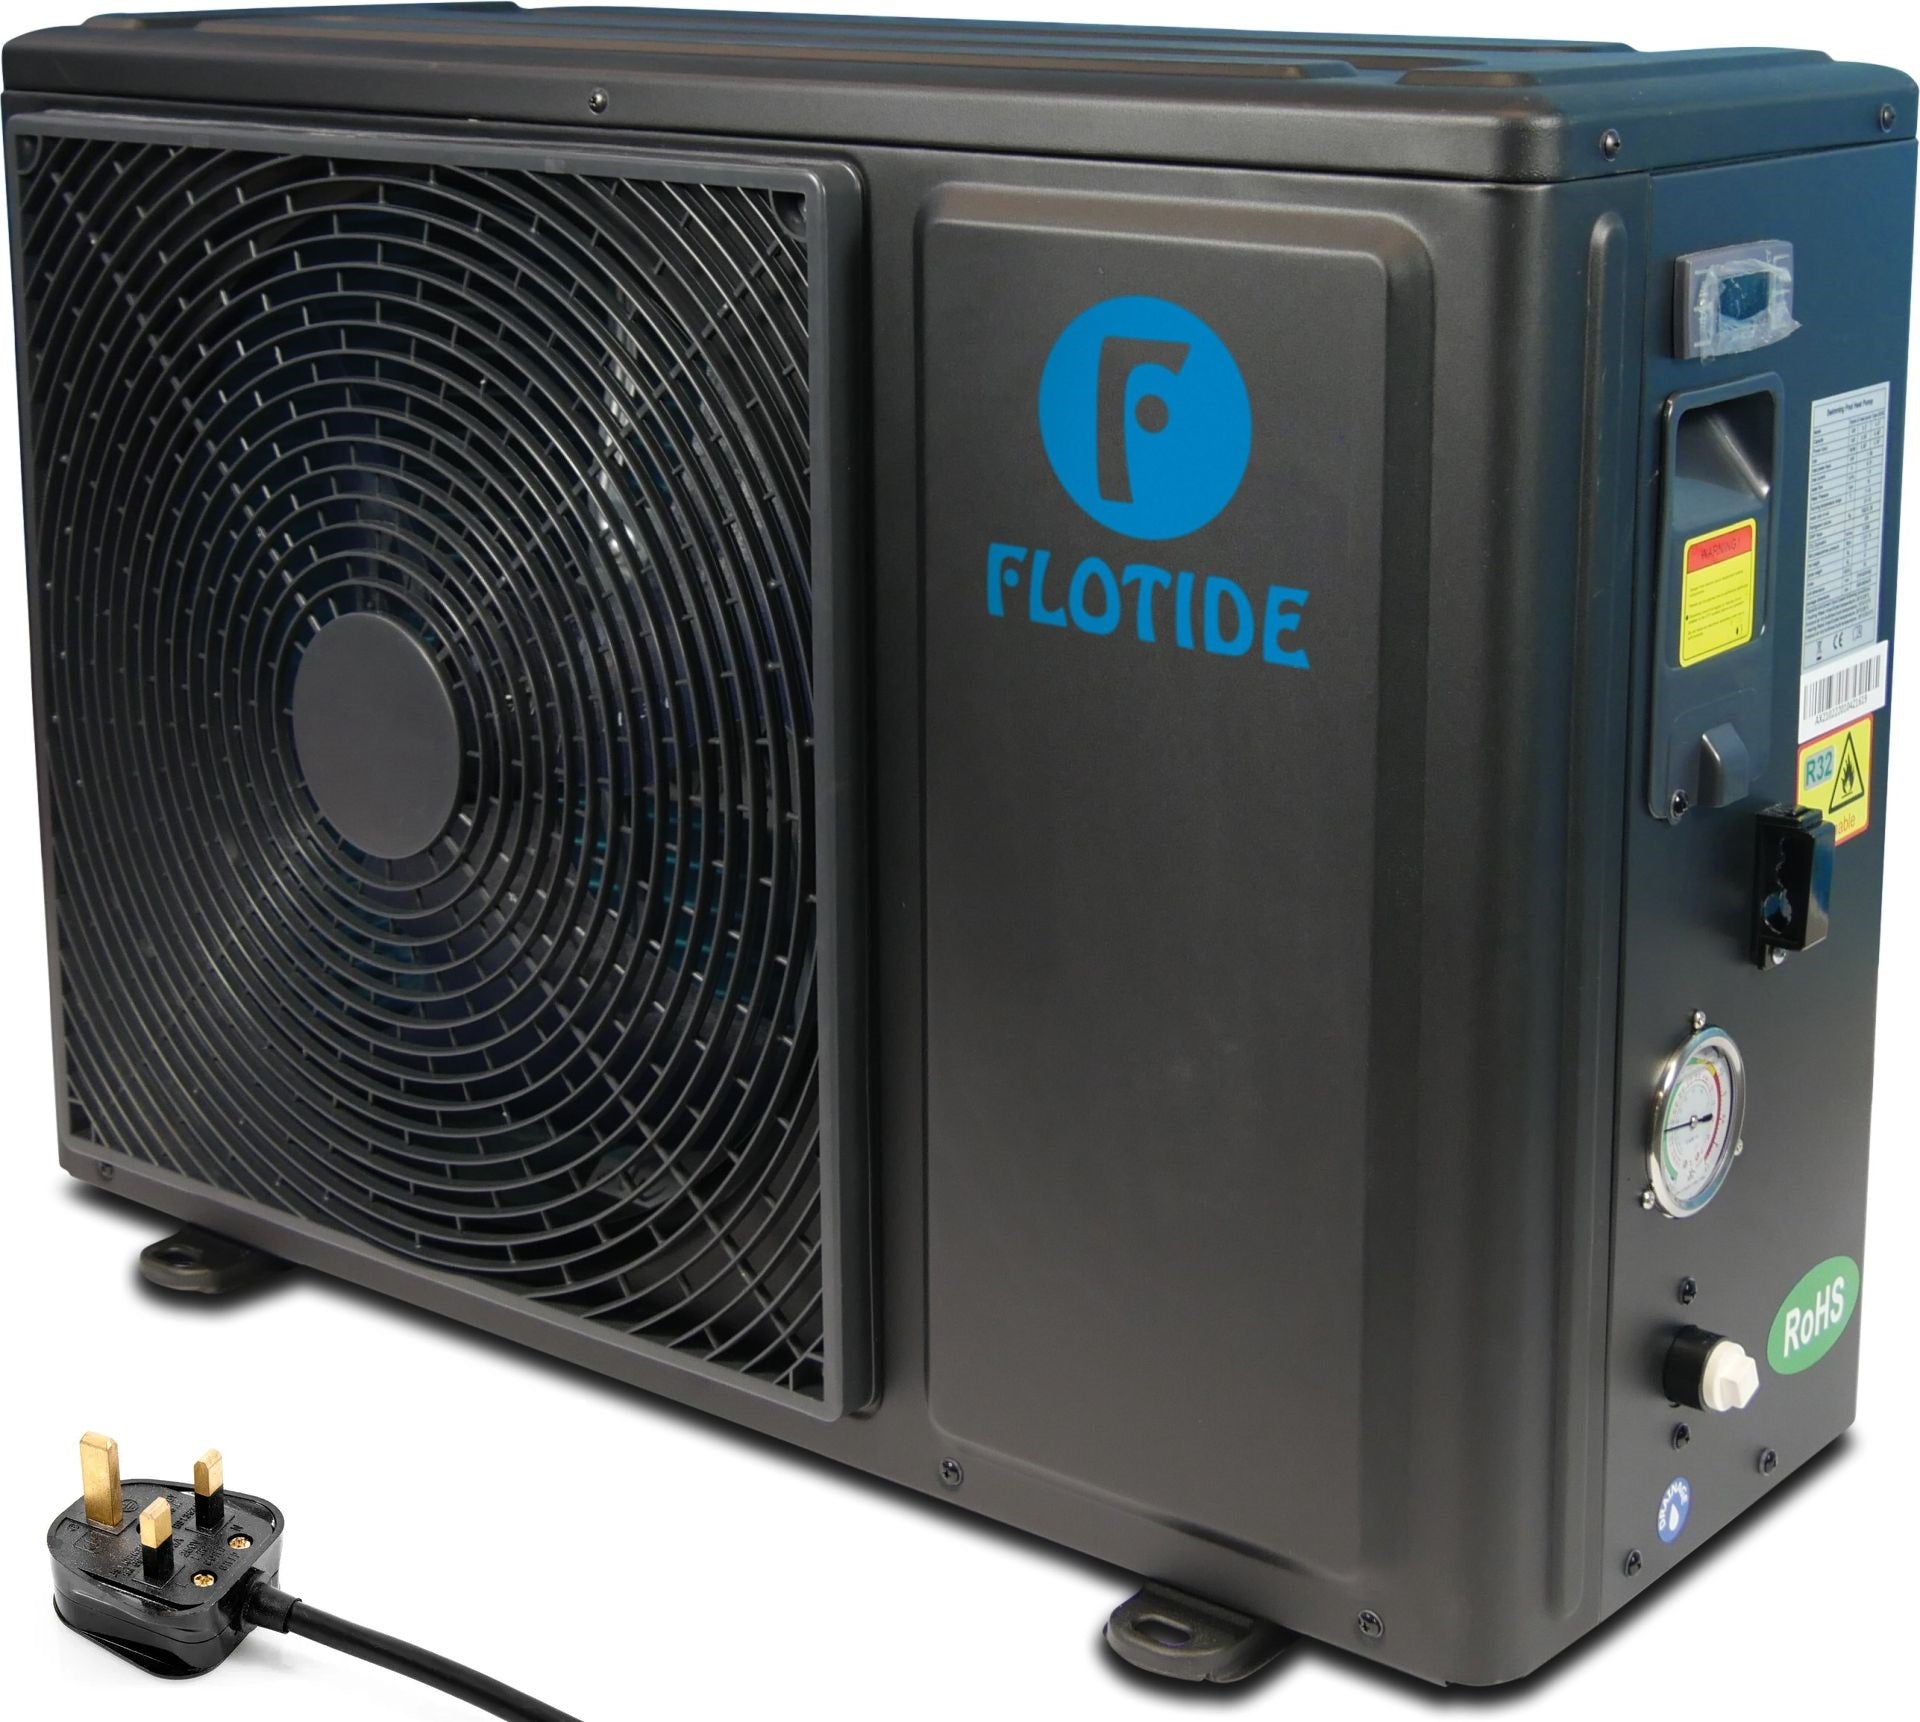 9.6KW Flotide Swimming Pool Heat Pump UK Plug and Play (A10)